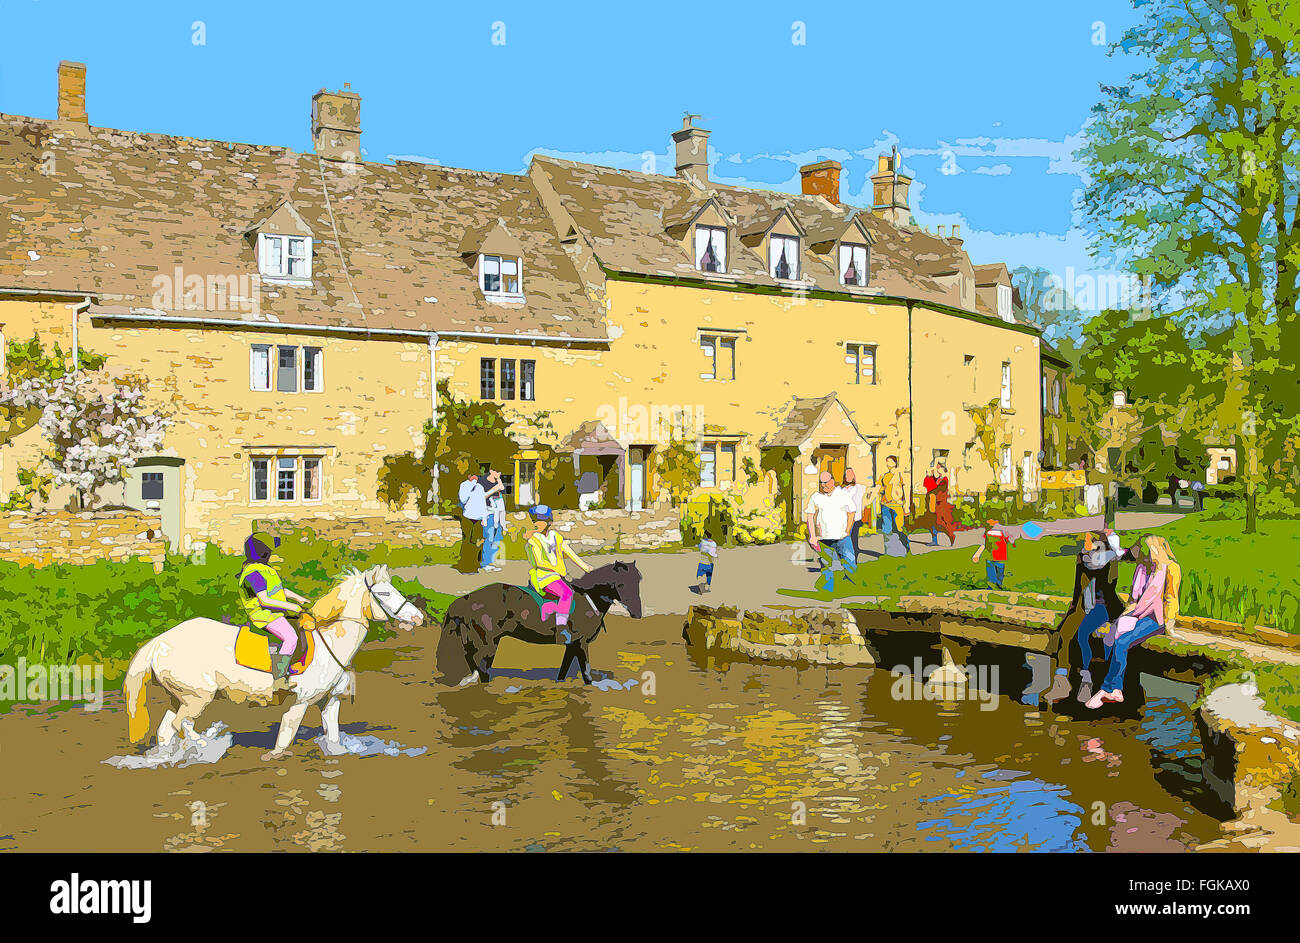 A poster style illustration from a photograph of the Cotswold village of Lower Slaughter, Gloucestershire, England, UK Stock Photo